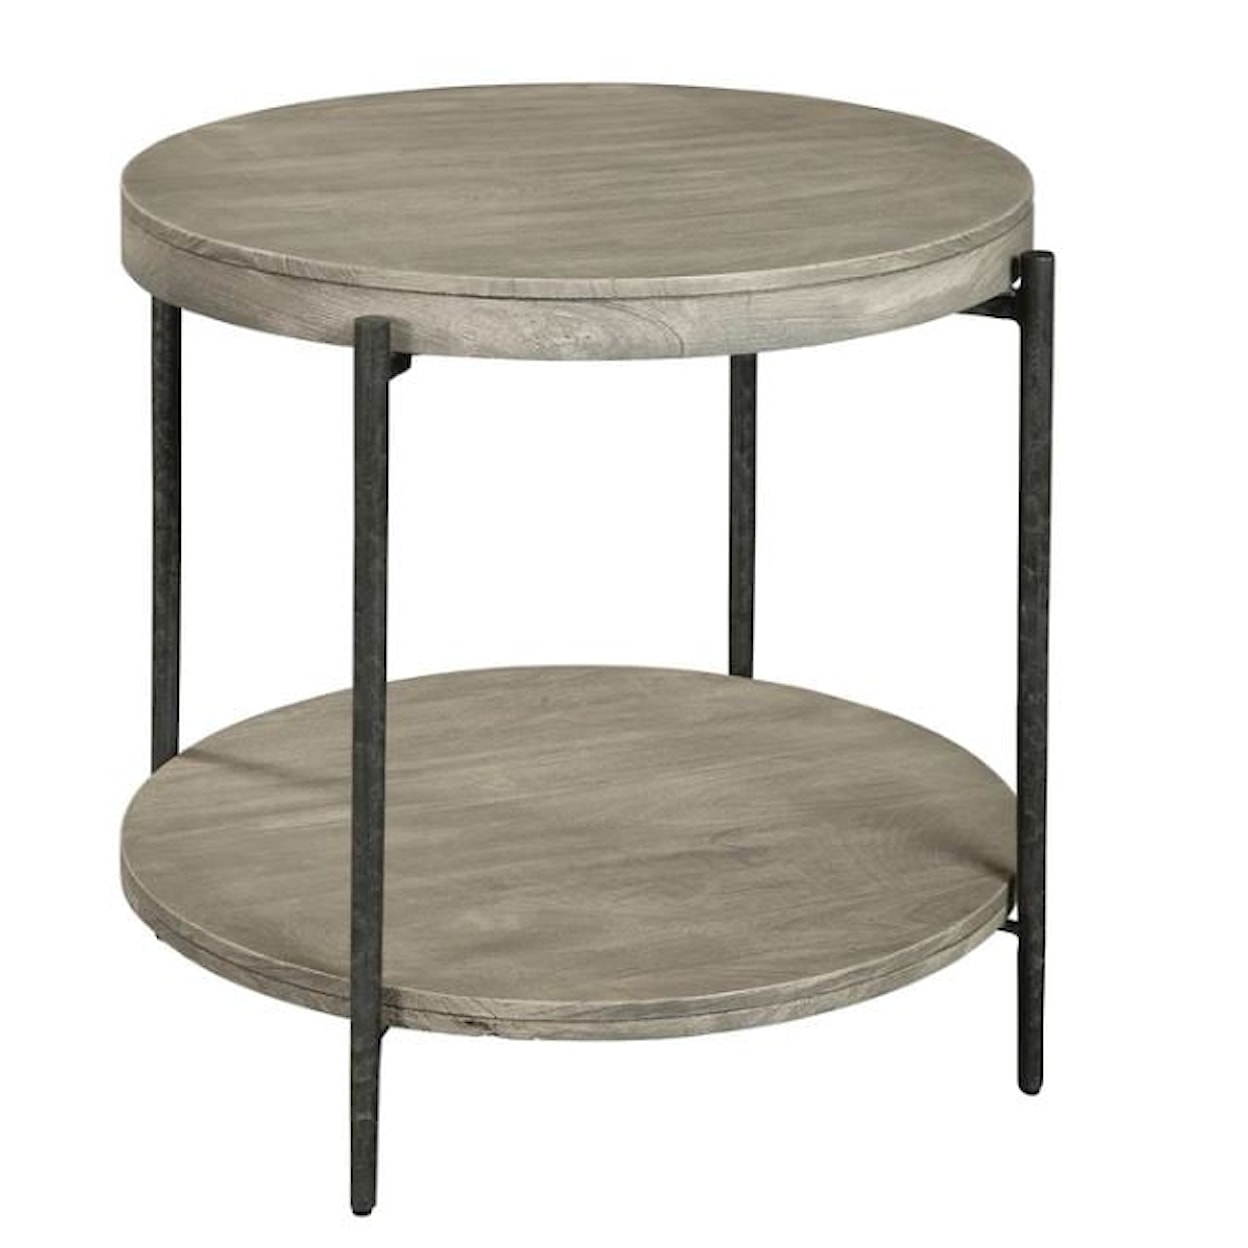 Hekman Bedford Park Round Side Table 